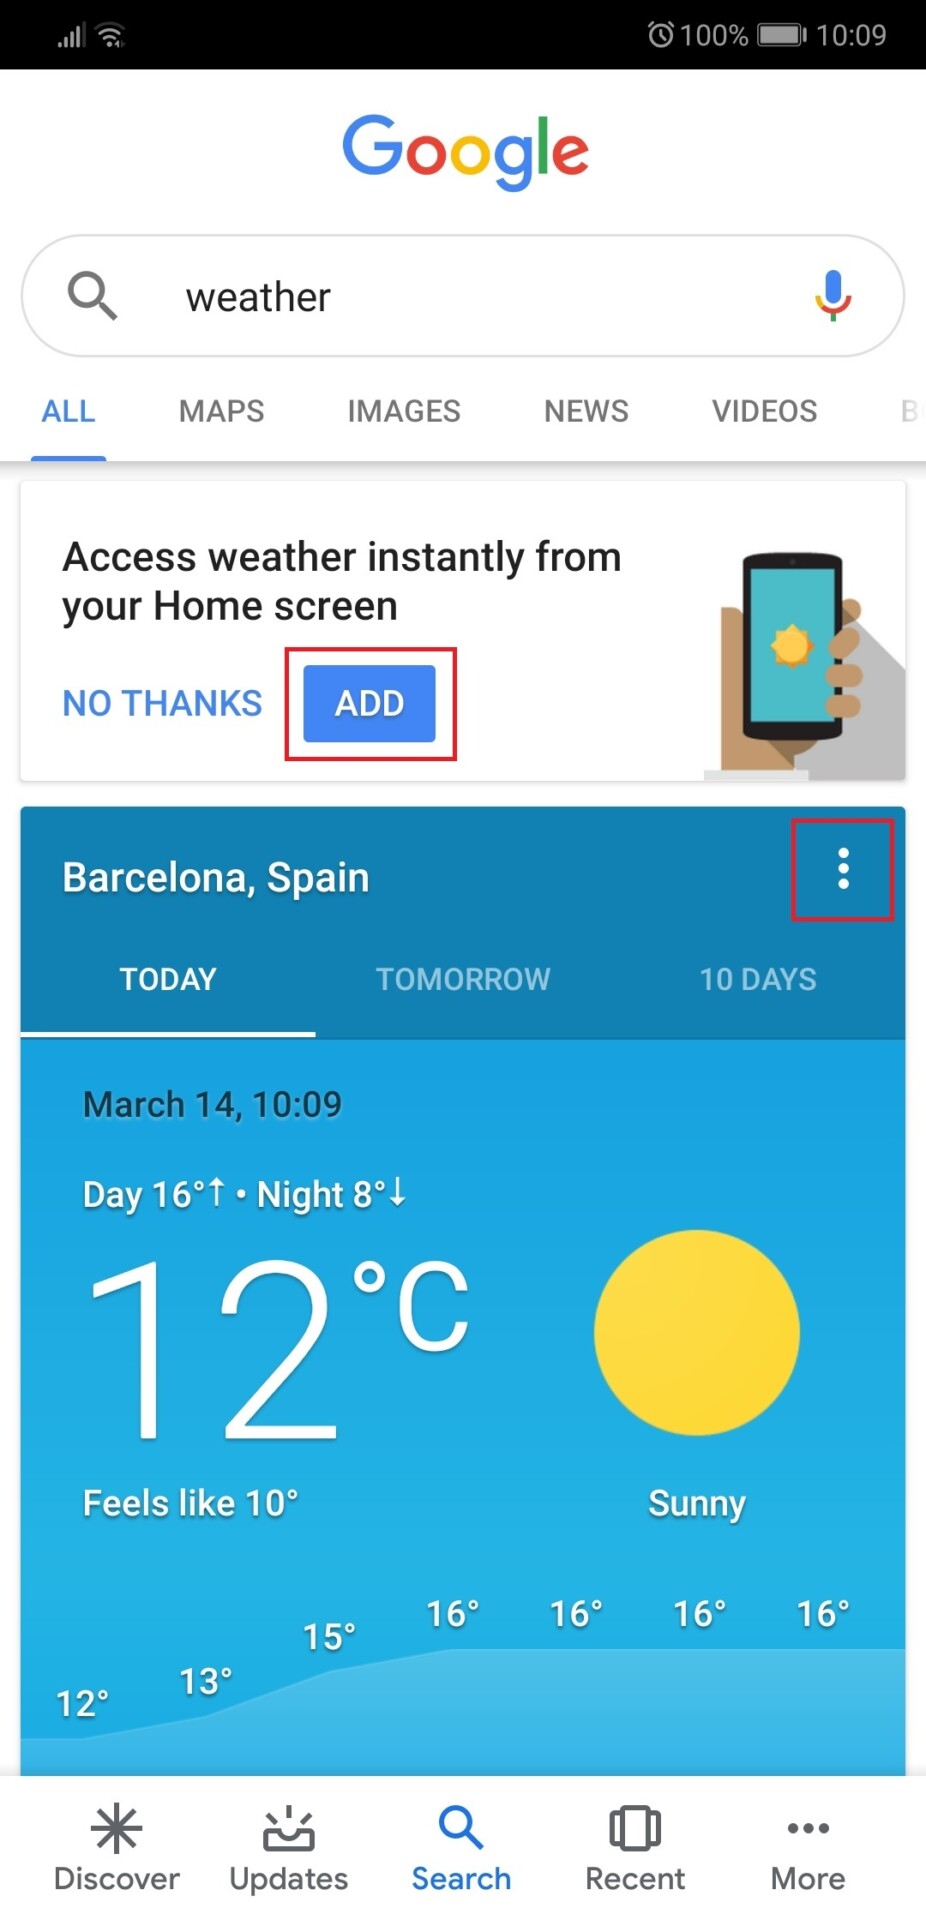 How to get the Google weather app on your phone